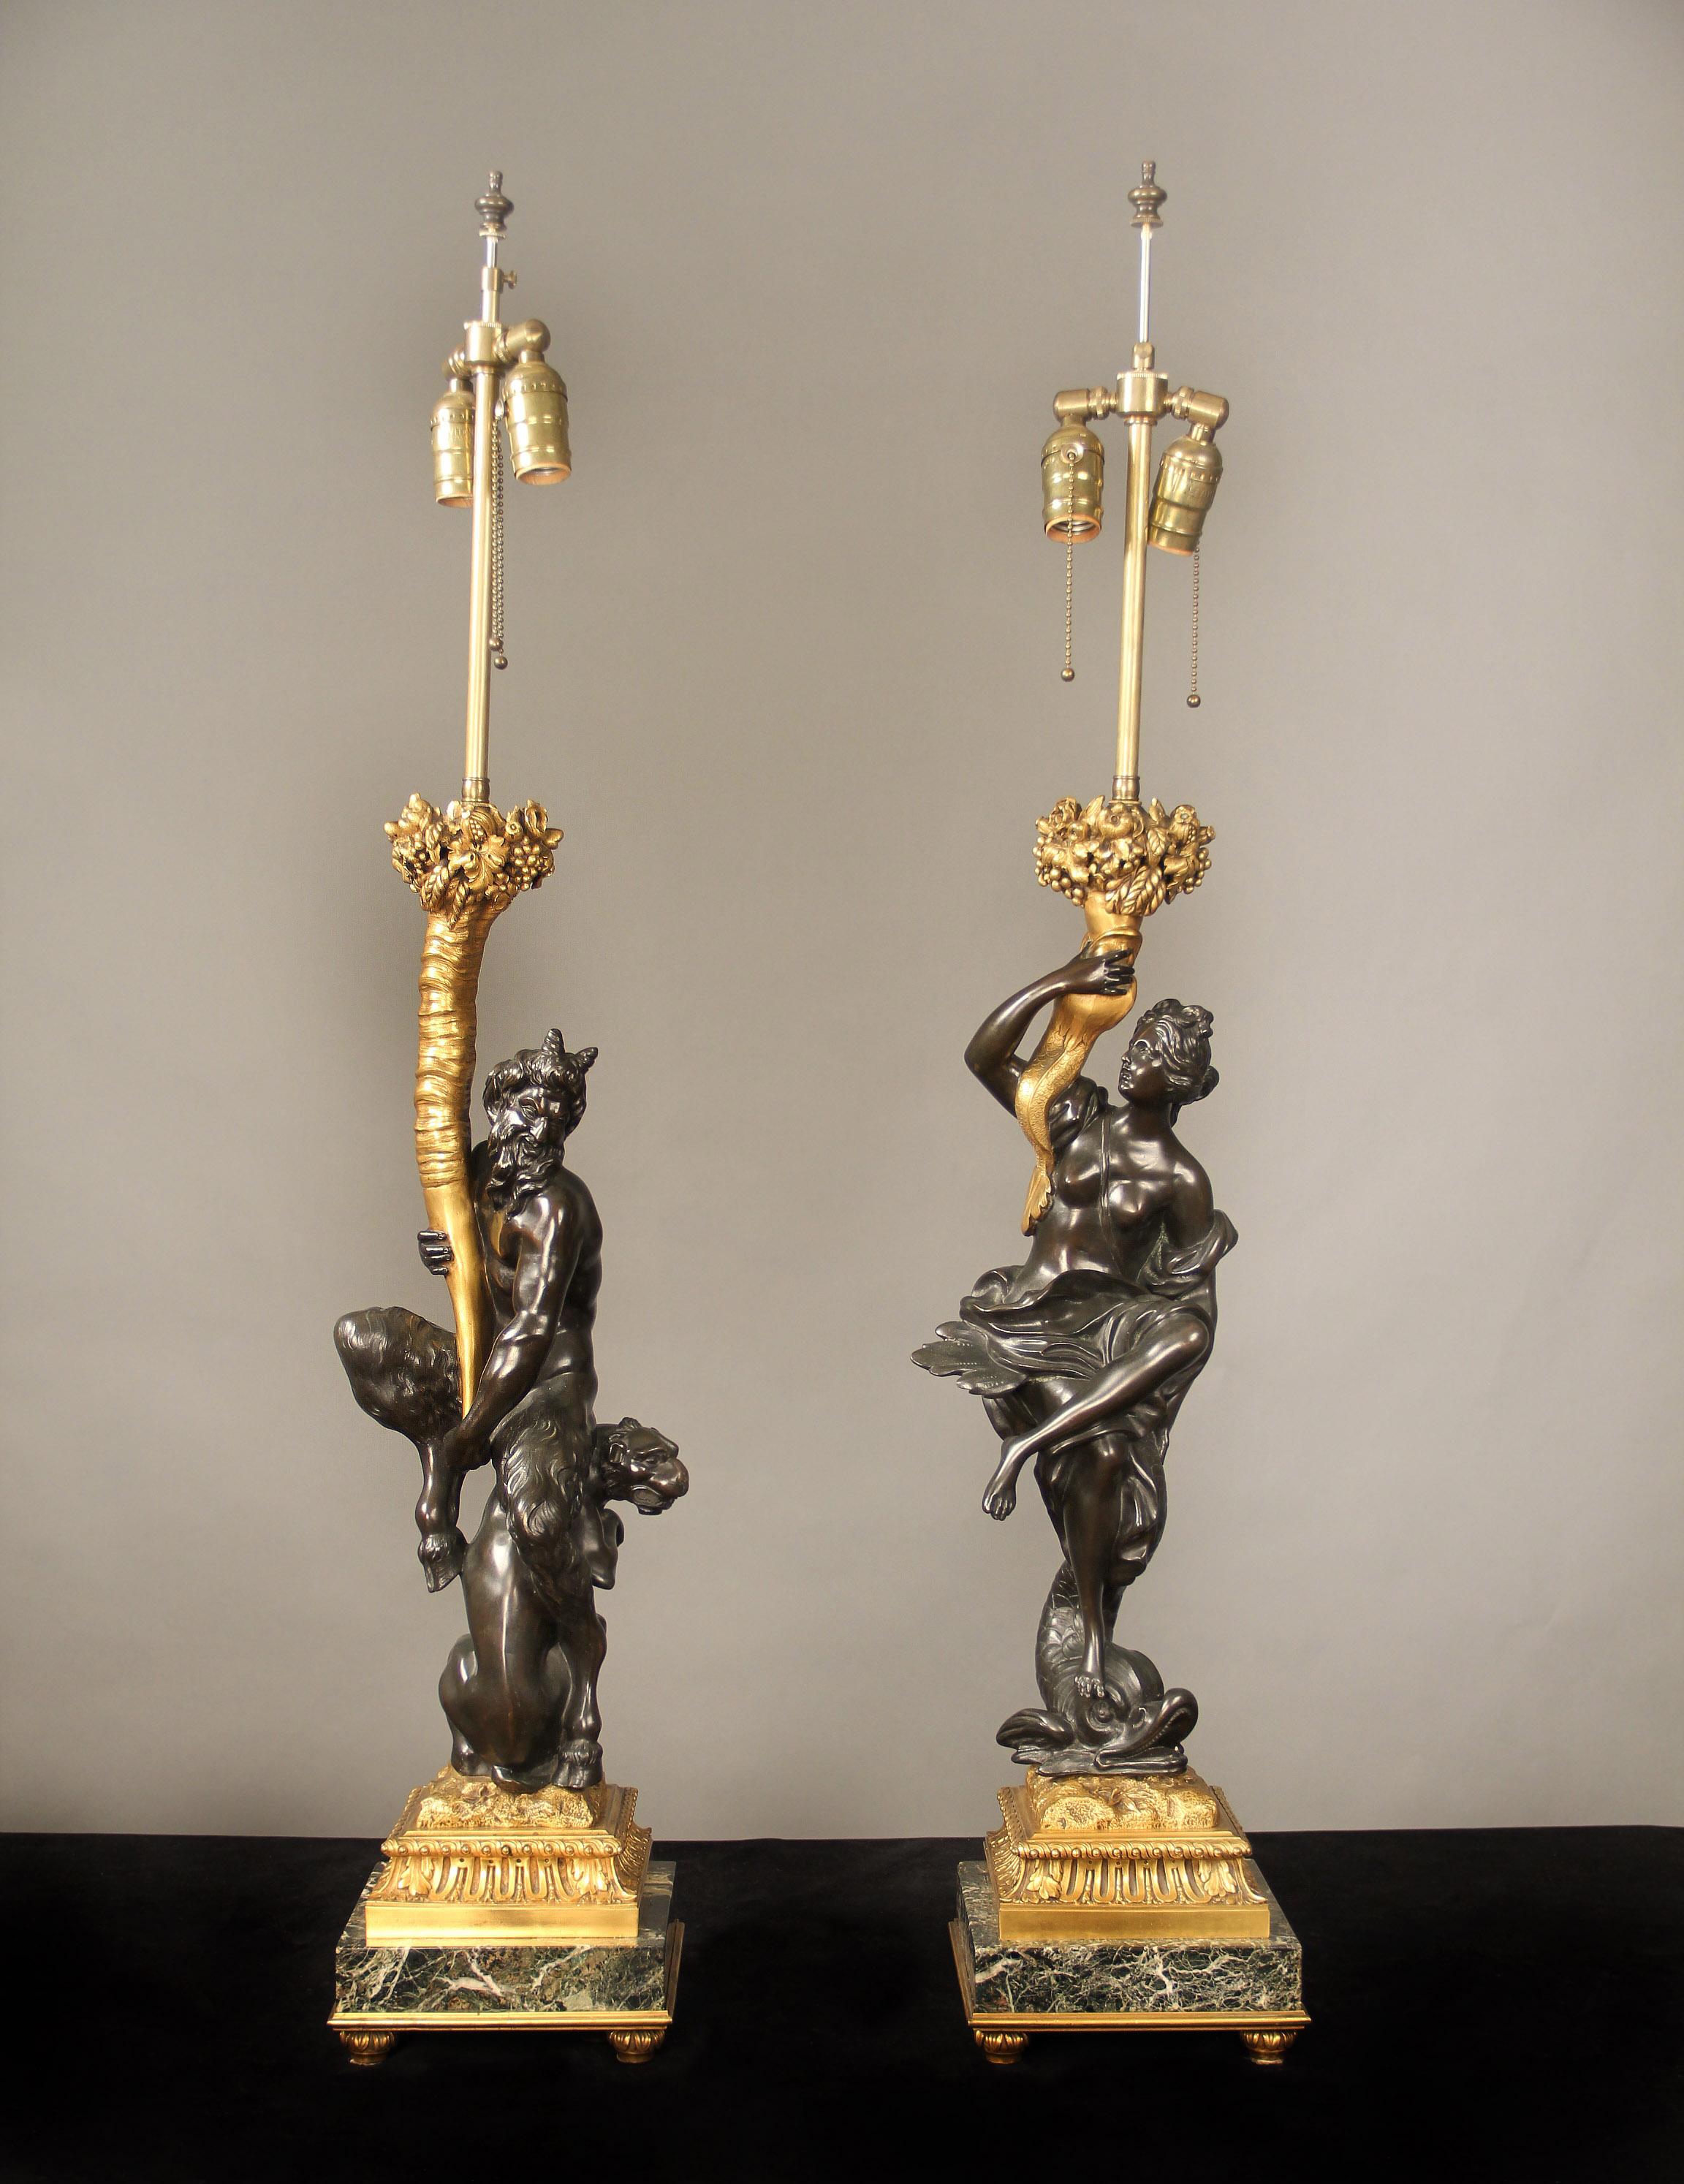 A fantastic pair of early 20th century gilt and patinated bronze and marble figural candelabra By Caldwell

Edward F. Caldwell and Co. Inc. New York

These famous candelabra modeled as two figures, one as a bacchante, seated on a dolphin, and